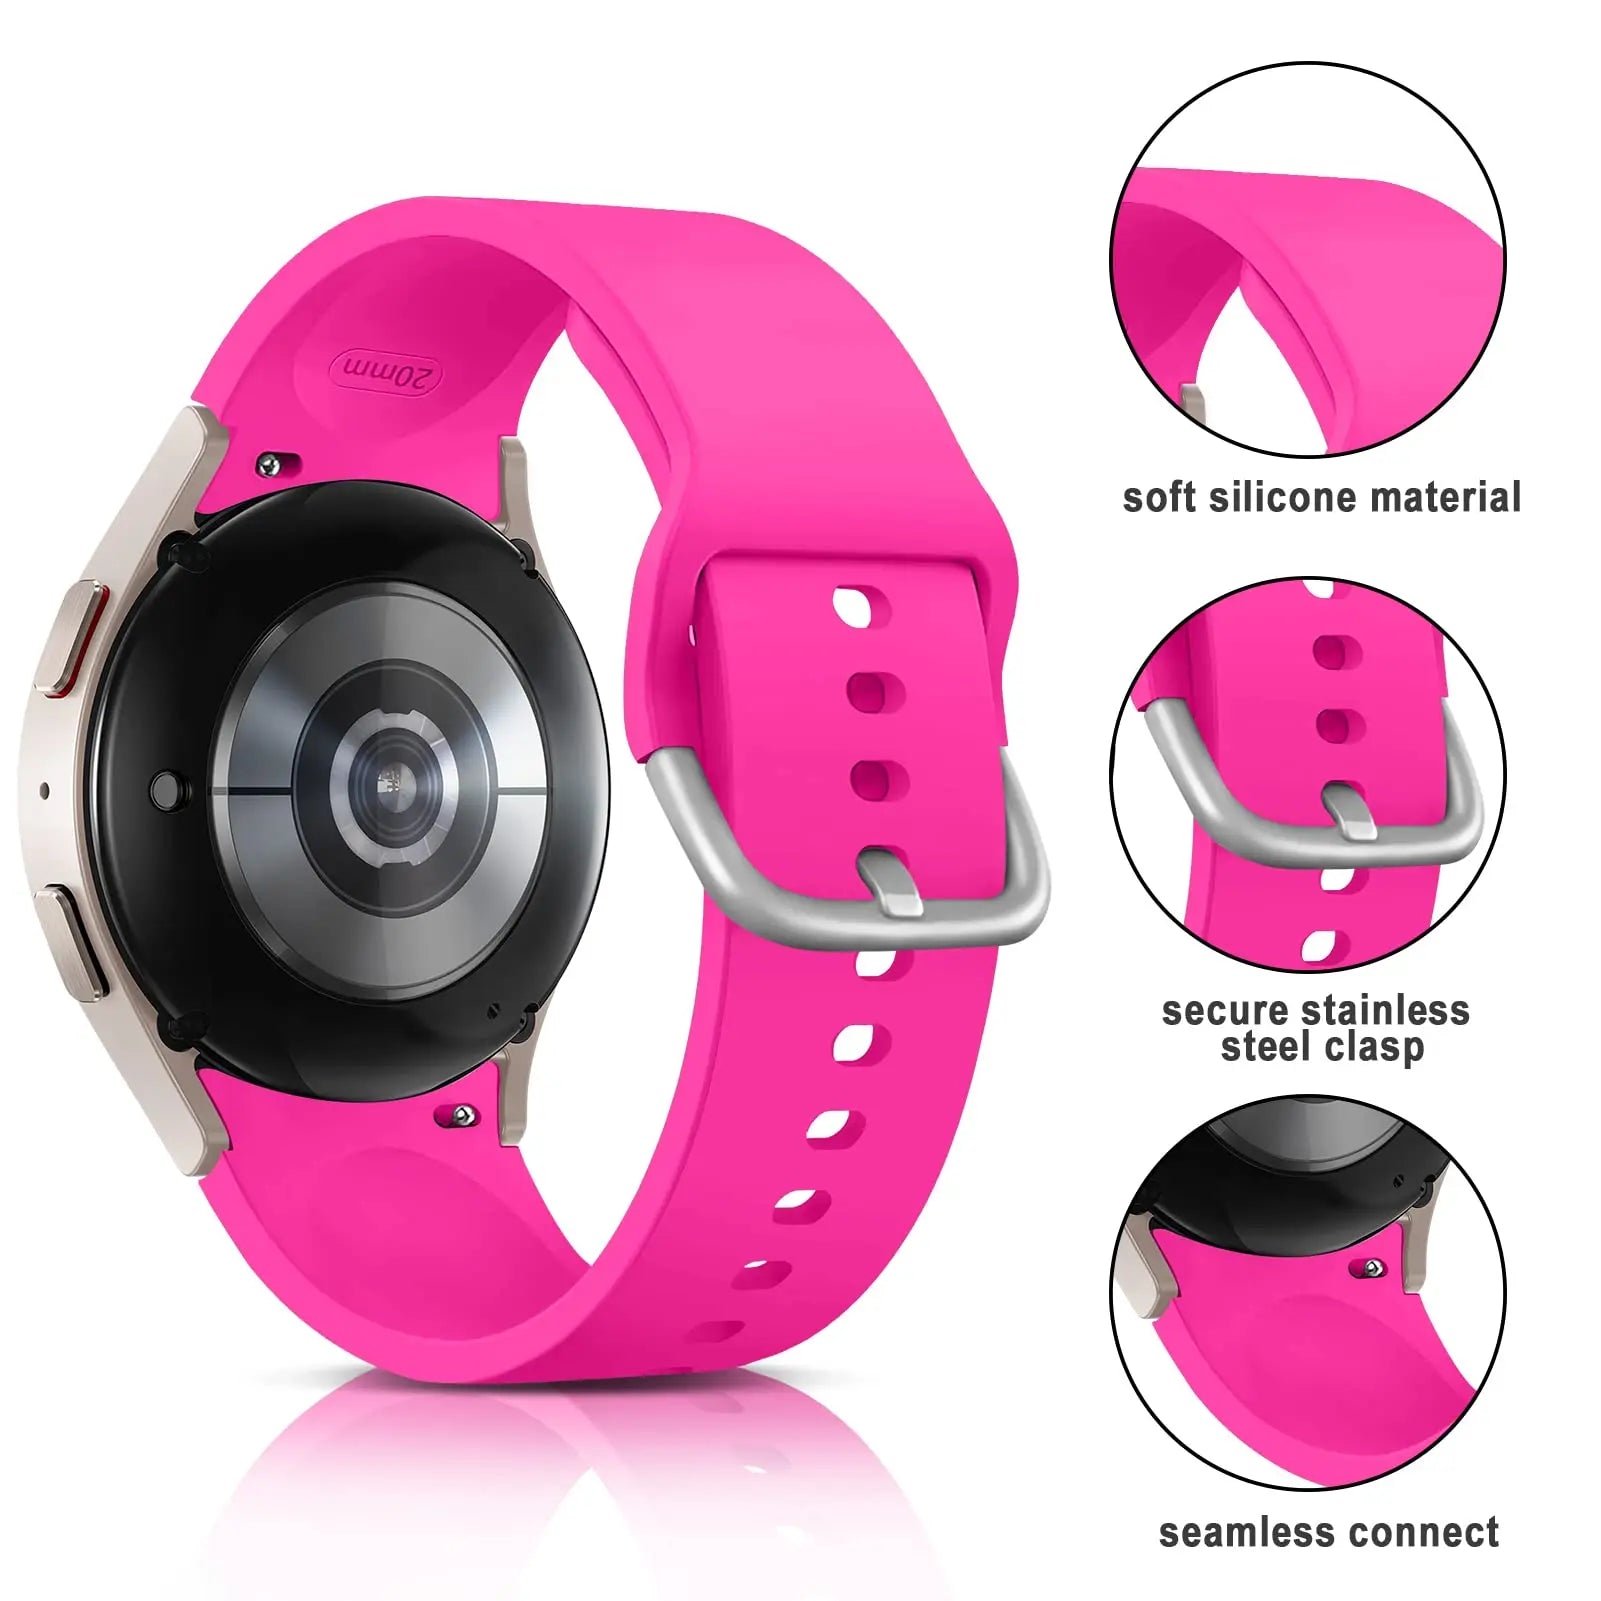 Strap For Samsung Galaxy Watch 6 5 4 44mm 40mm/5 Pro 45mm wristband 20mm Silicone Bracelet Galaxy Watch 6 classic 43mm 47mm Band